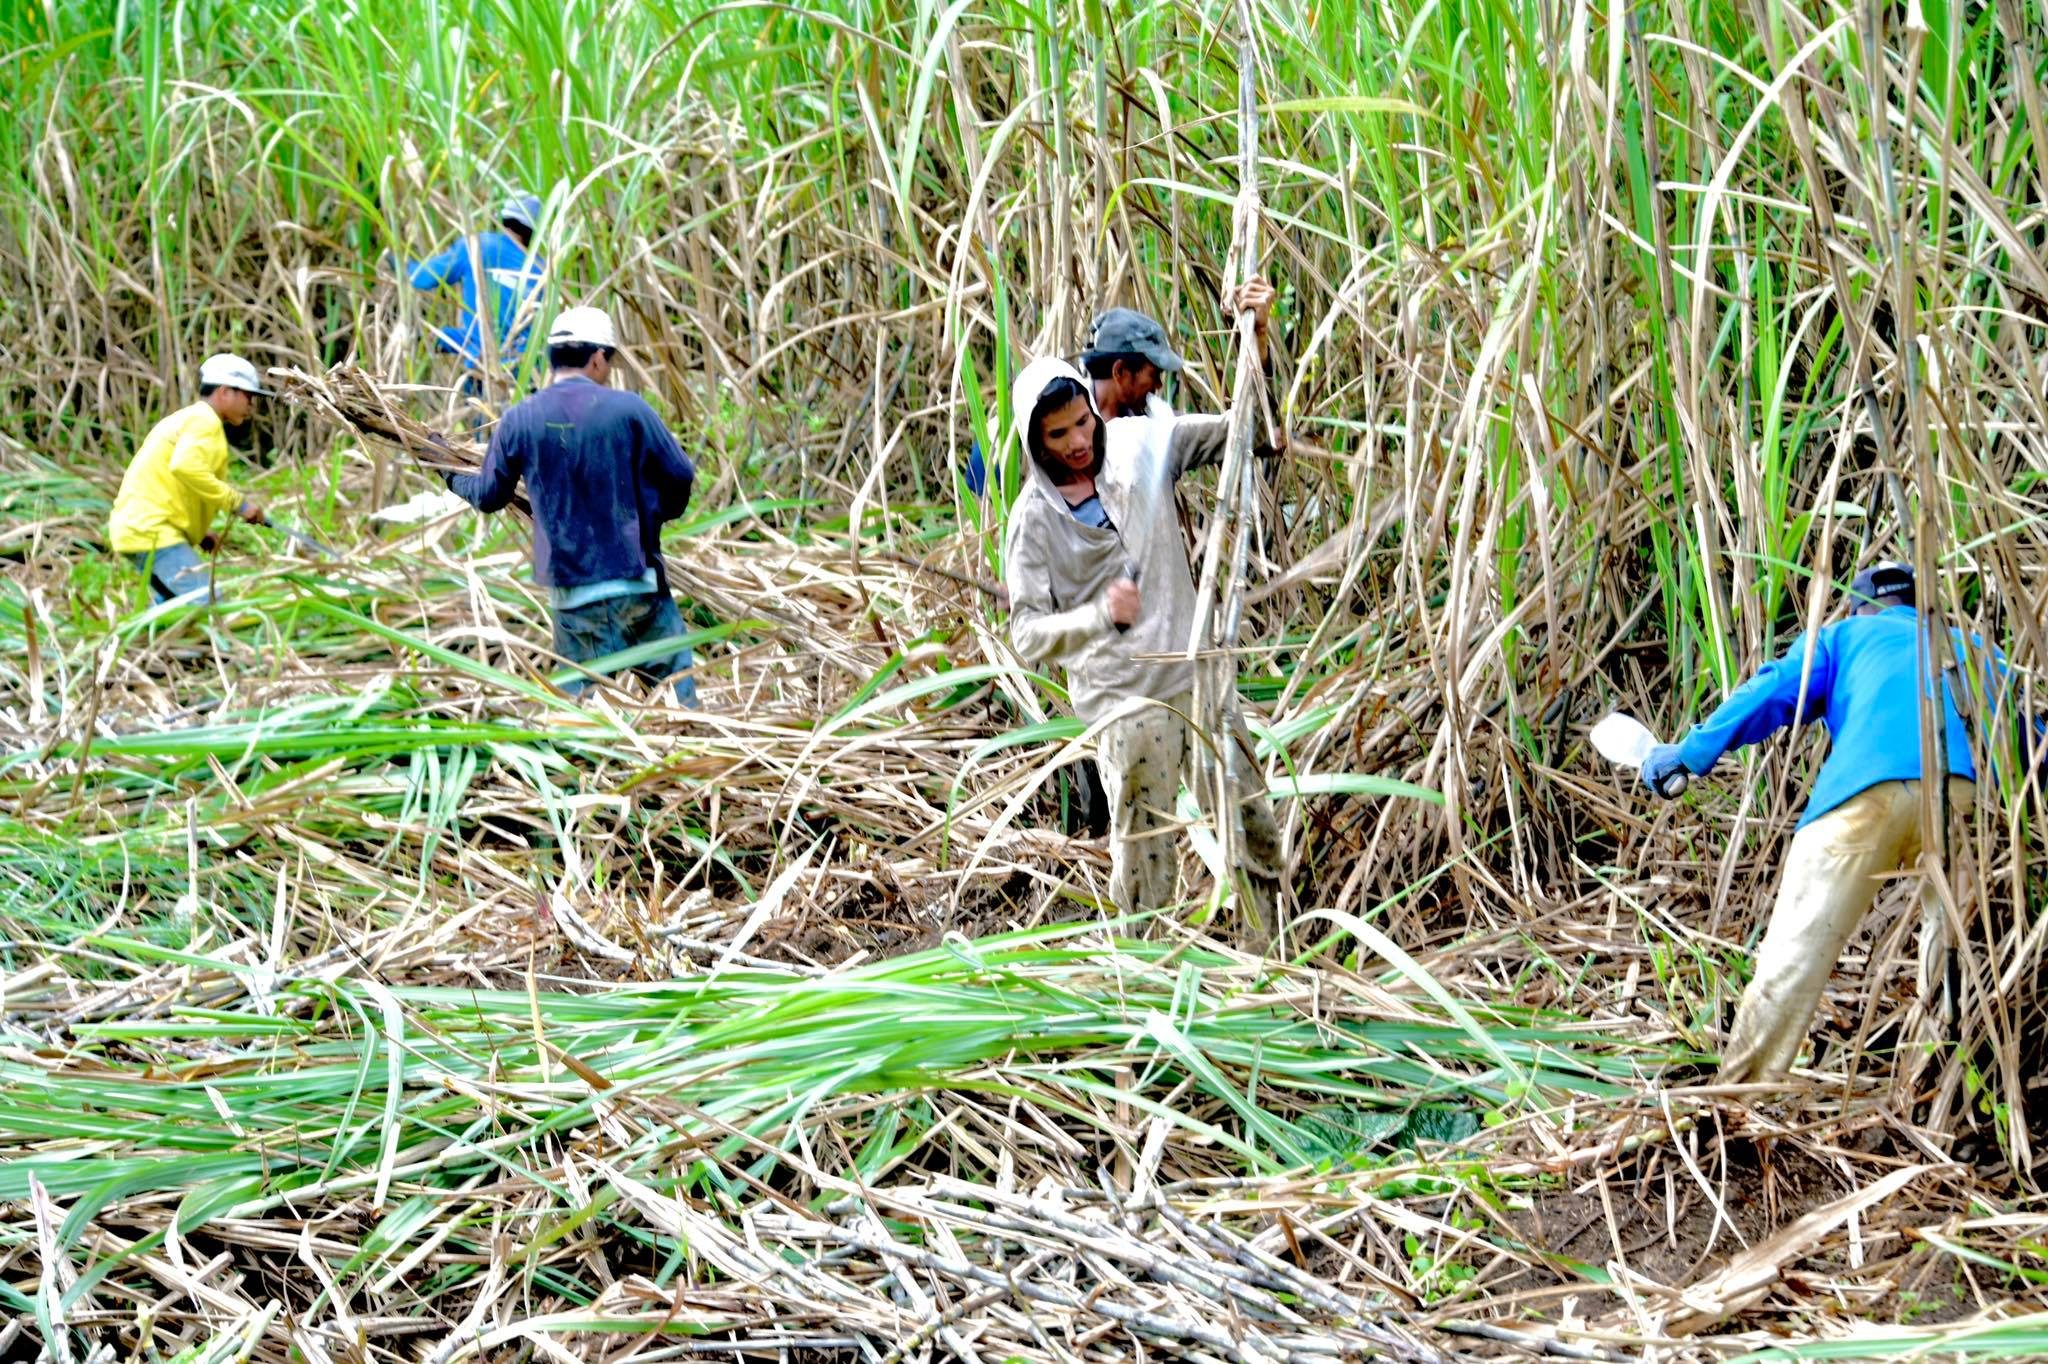 Sugar producers warn of unrest as gov’t ignores steep climb in farm input costs